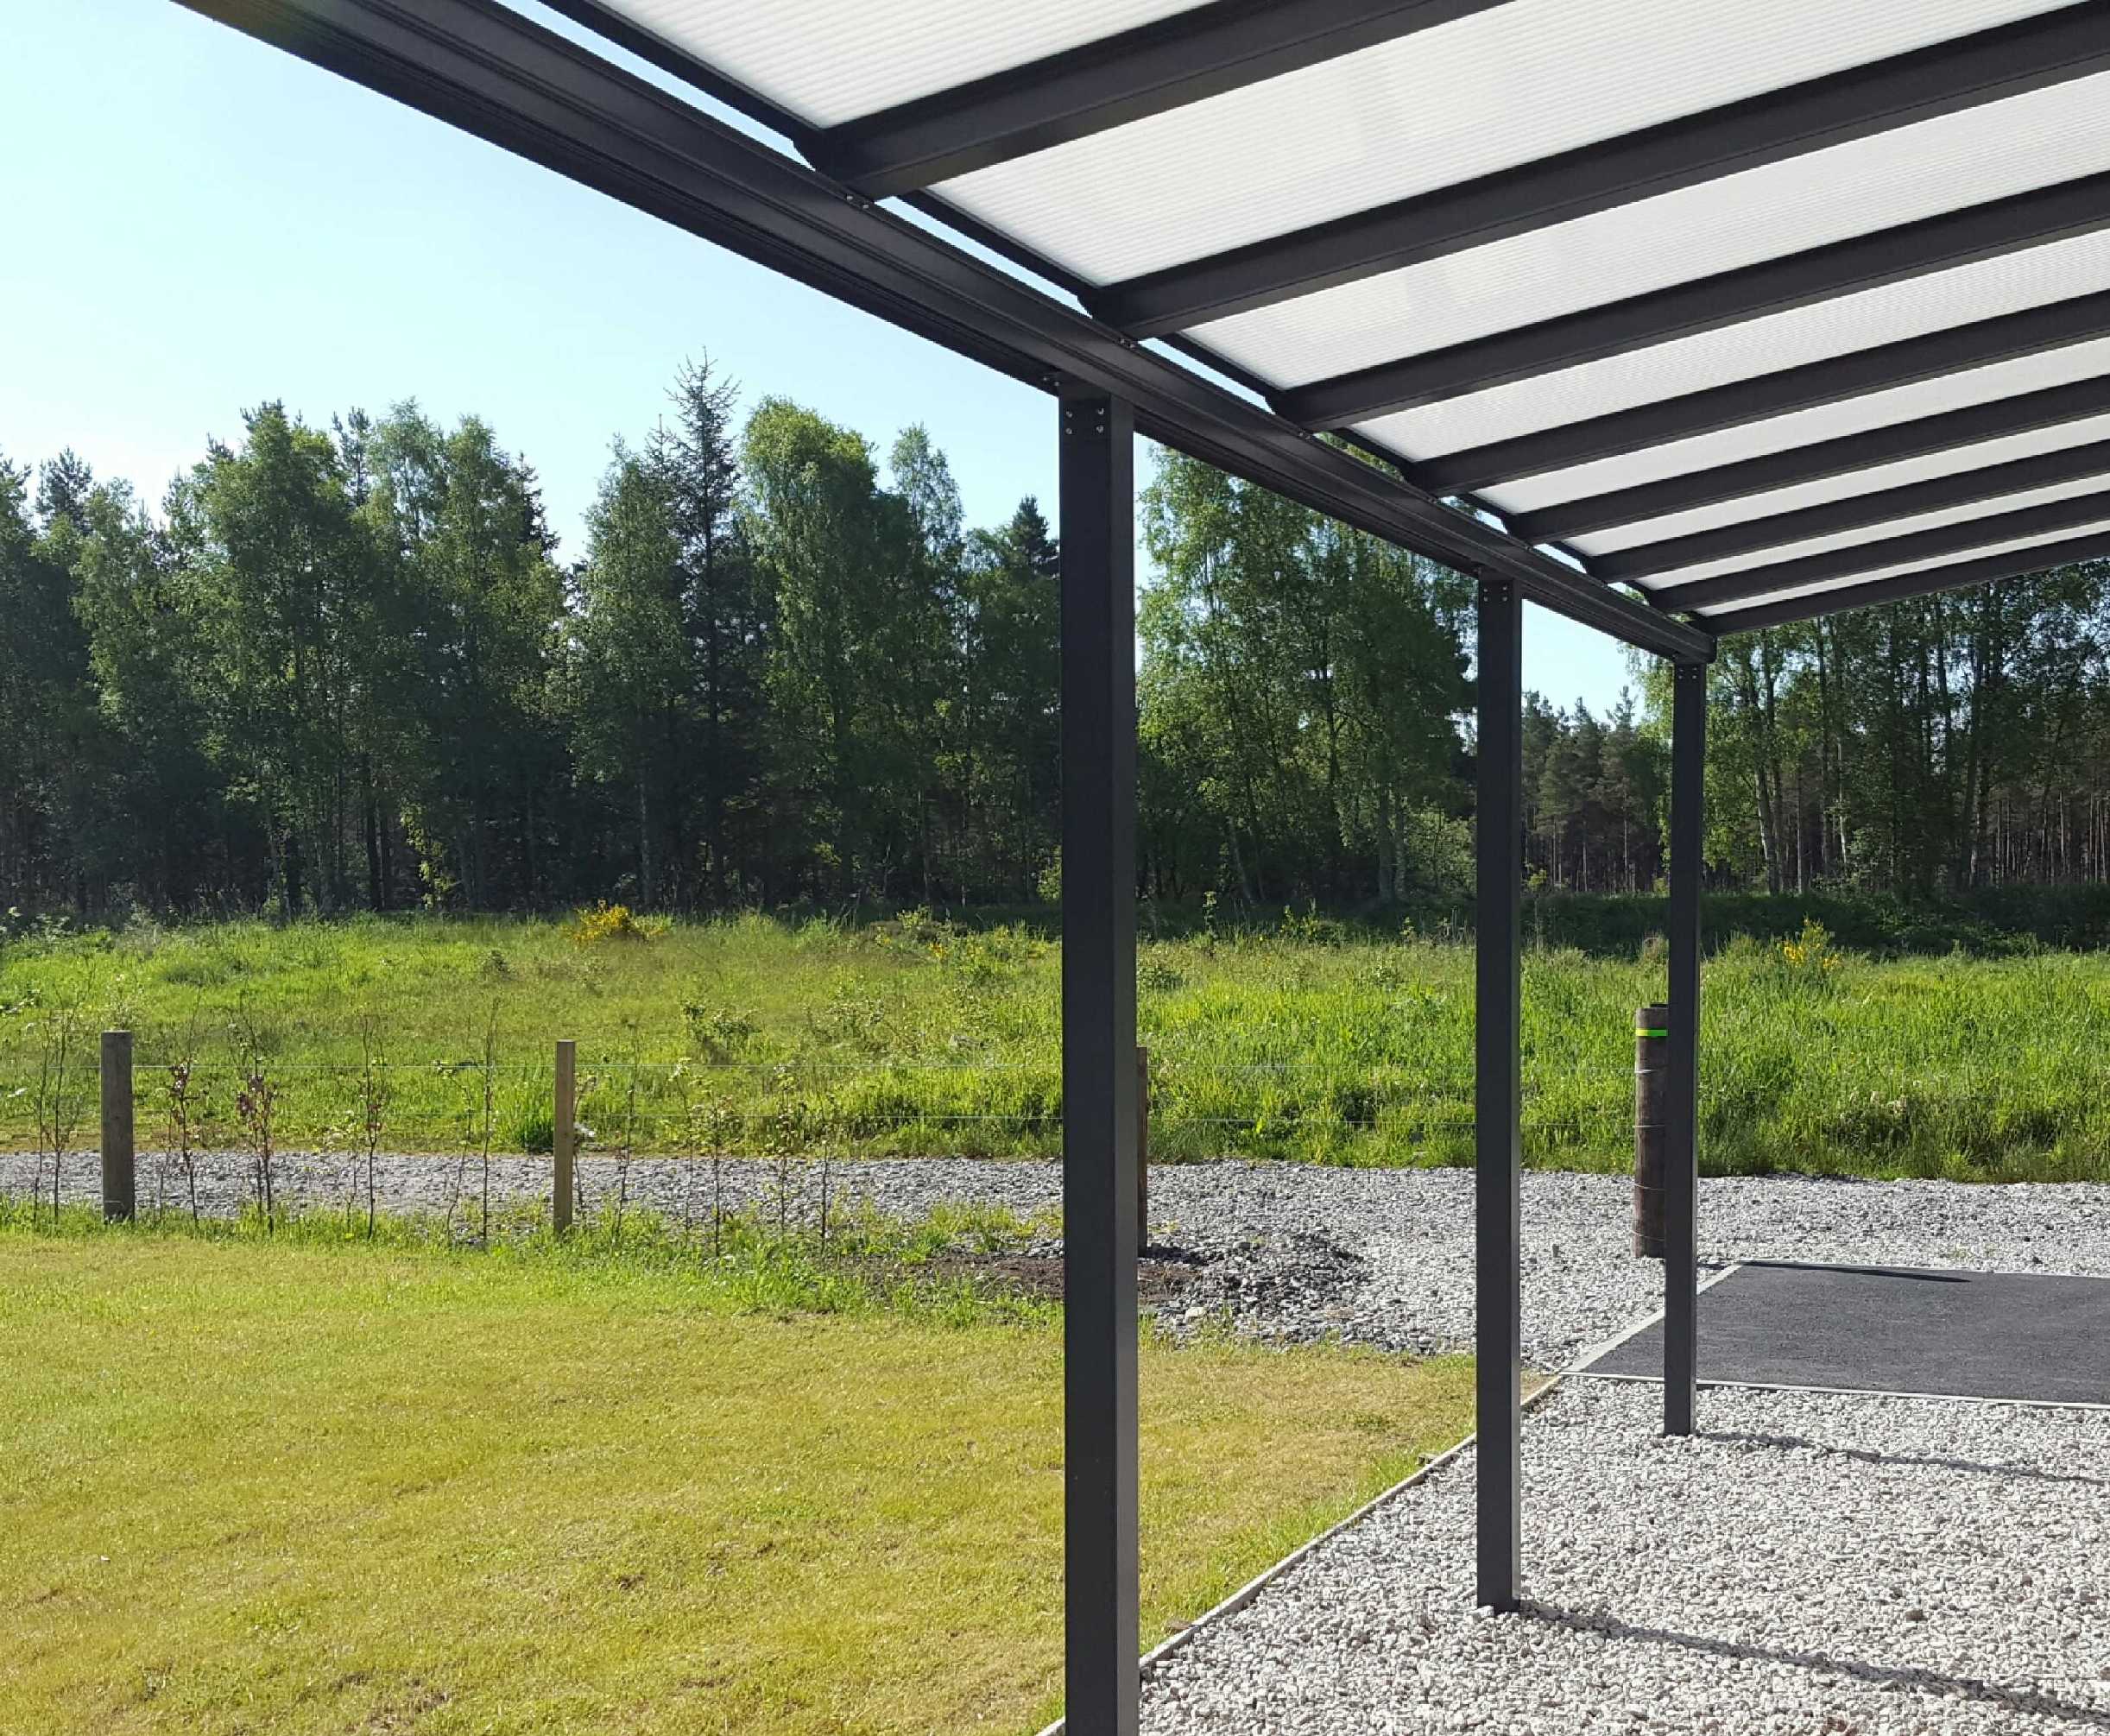 Omega Smart Lean-To Canopy, Anthracite Grey, UNGLAZED for 6mm Glazing - 2.1m (W) x 2.0m (P), (2) Supporting Posts